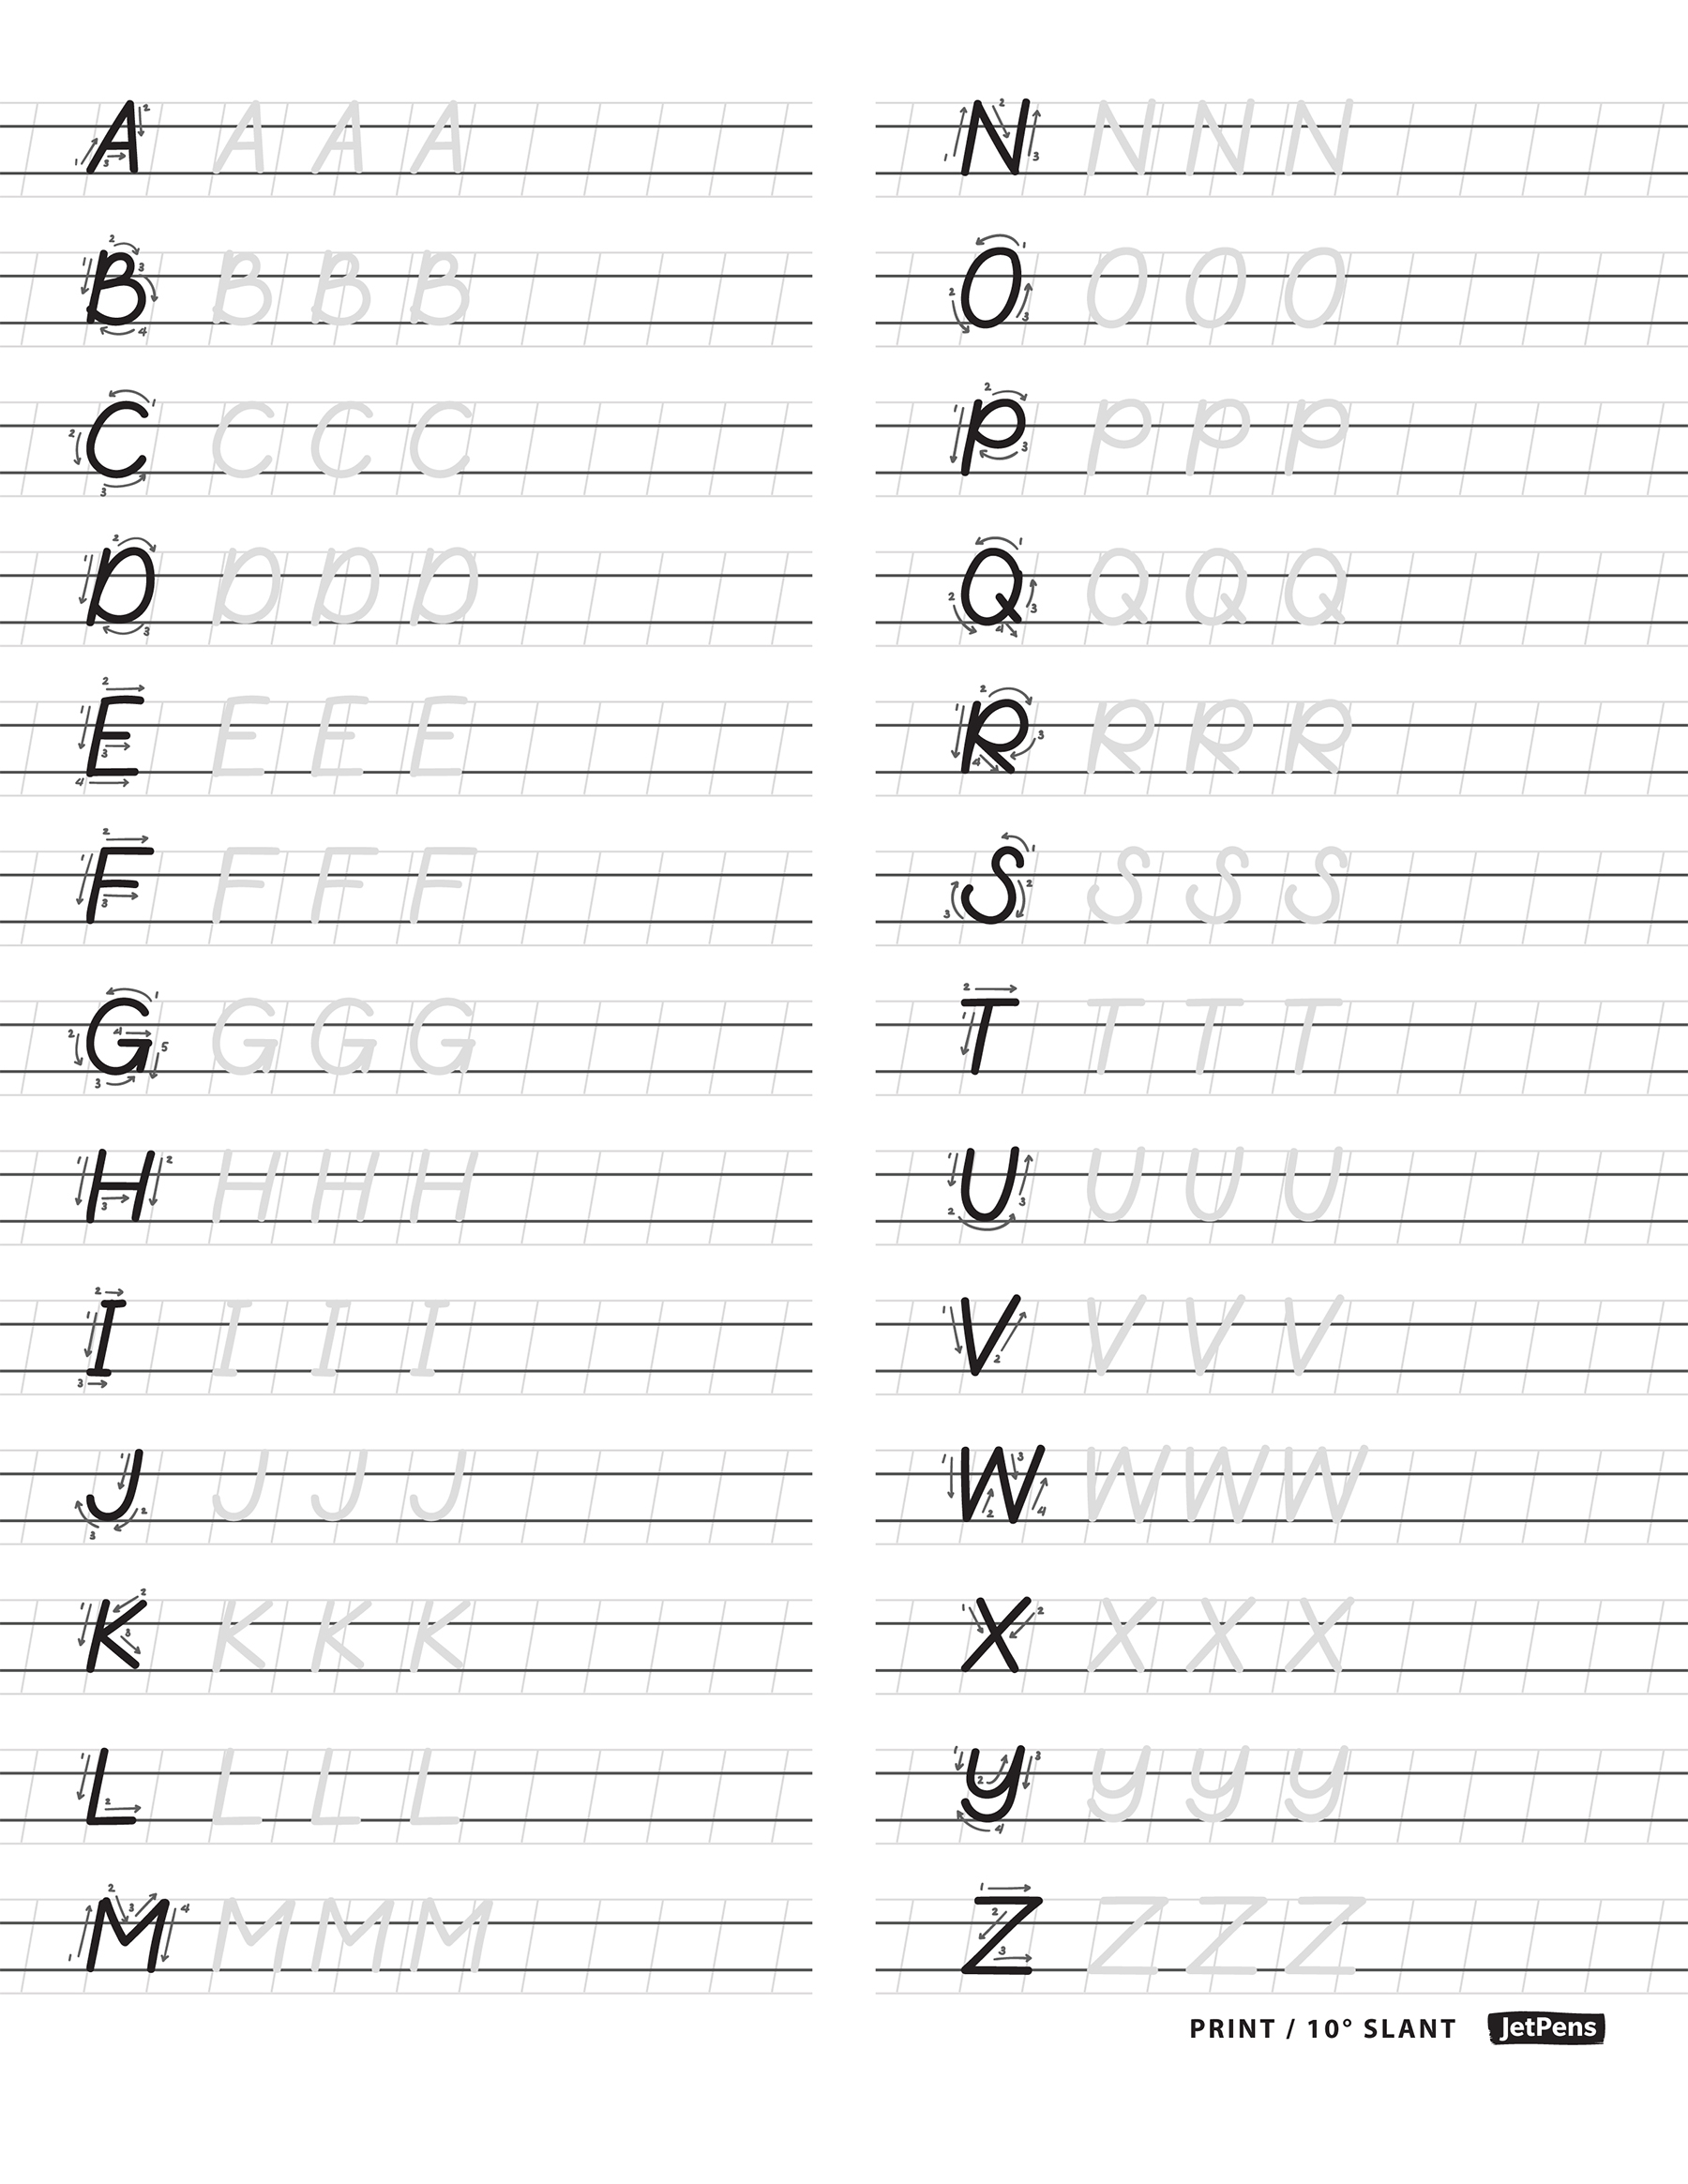 How to Make Your Own Handwriting Worksheets — vLetter, Inc